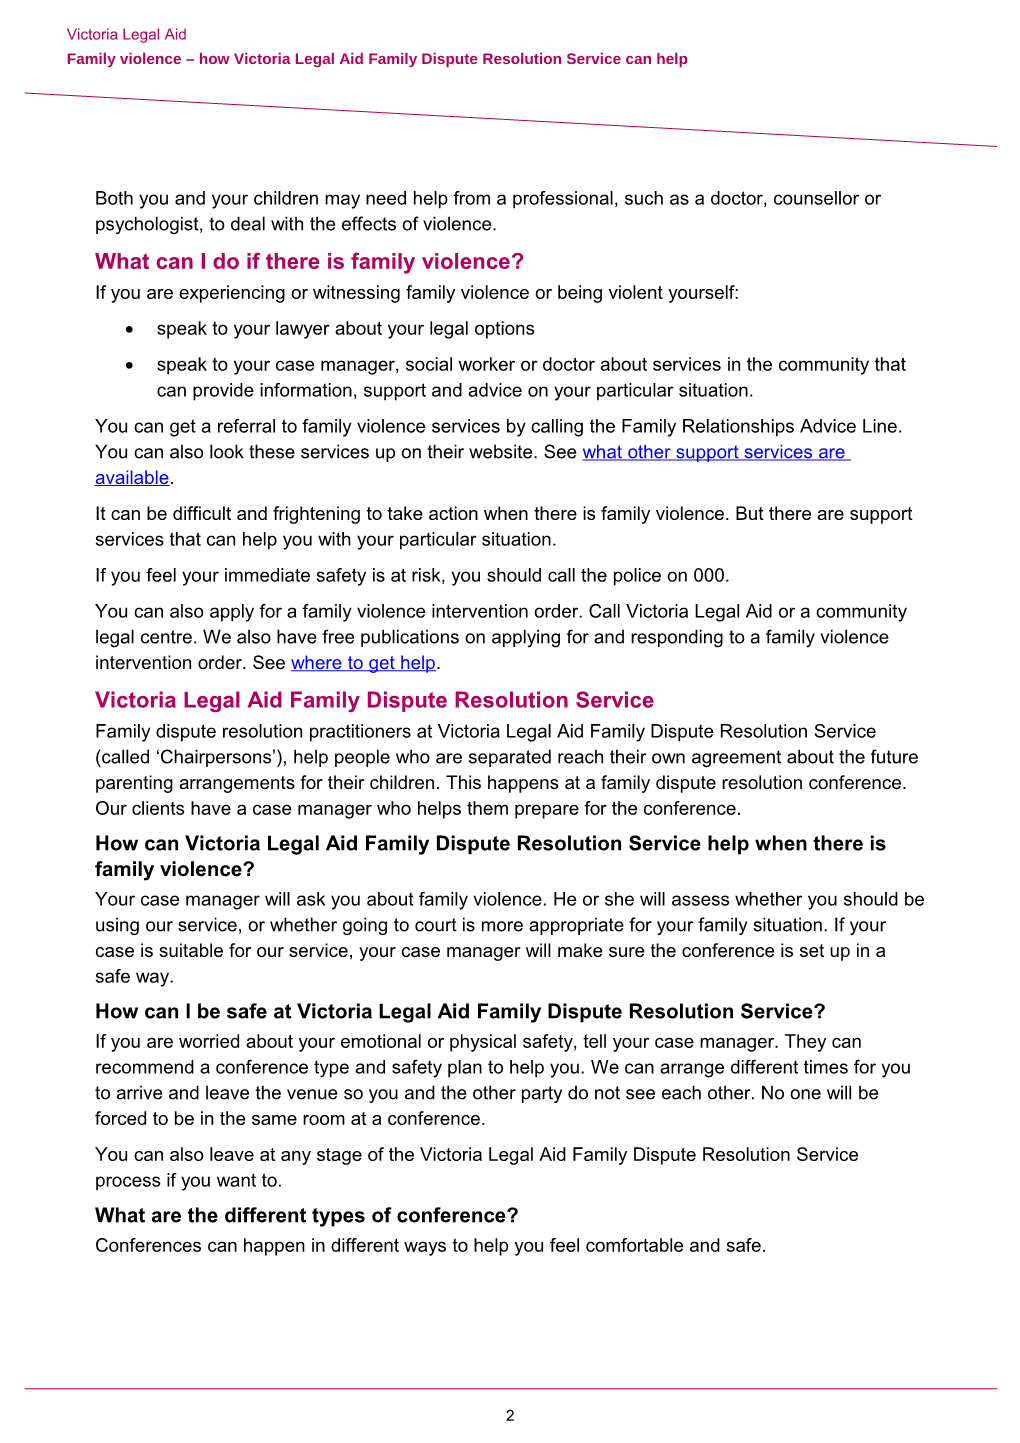 Family Violence - How Victoria Legal Aid Family Dispute Resolution Service Can Help